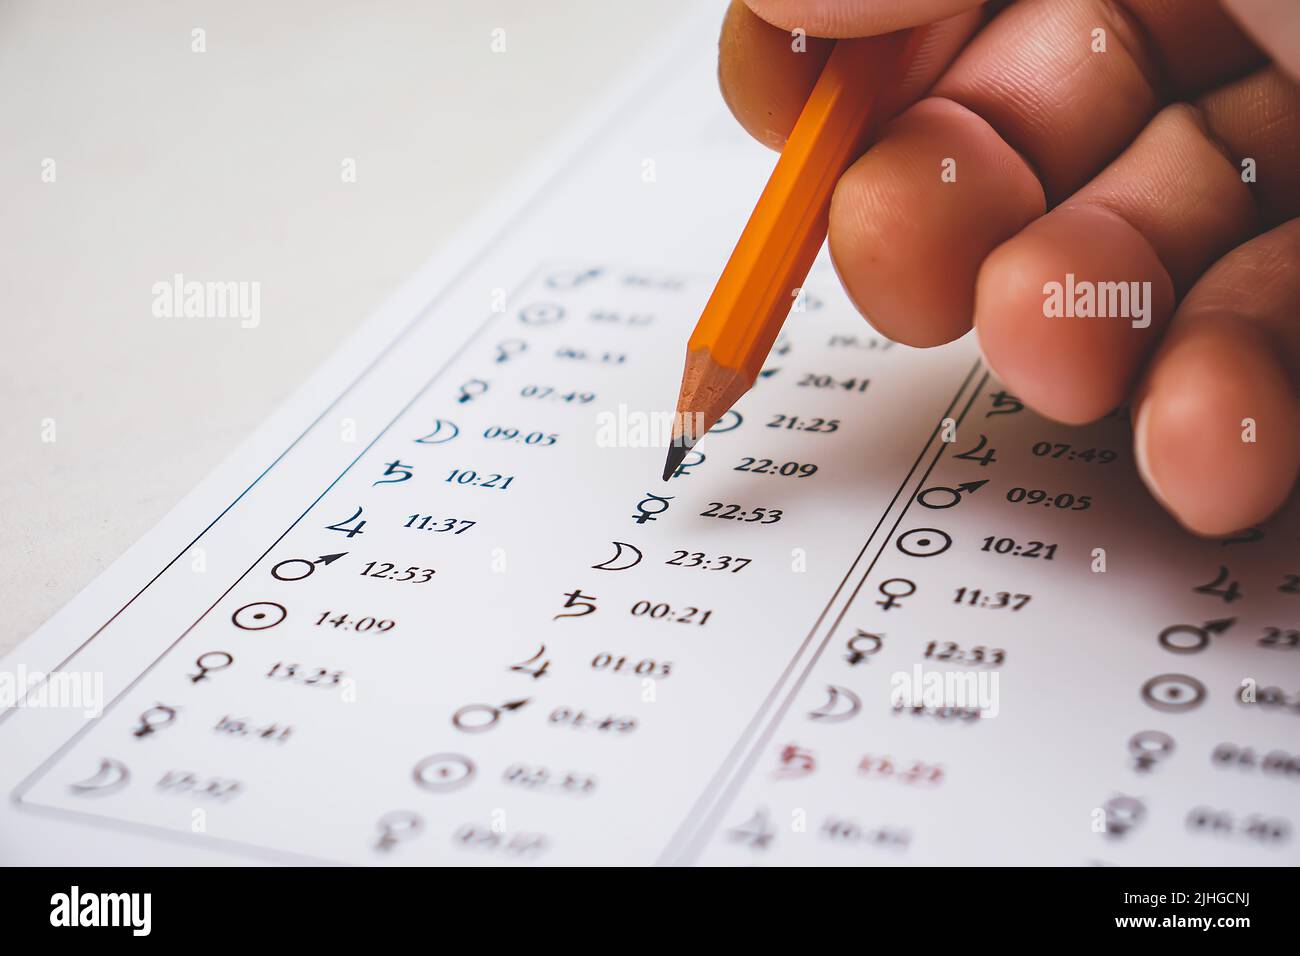 Modern astrologer's desktop. Hand with a pencil. Astrological charts and tables with the coordinates of the planets, astrological symbols close-up. Stock Photo